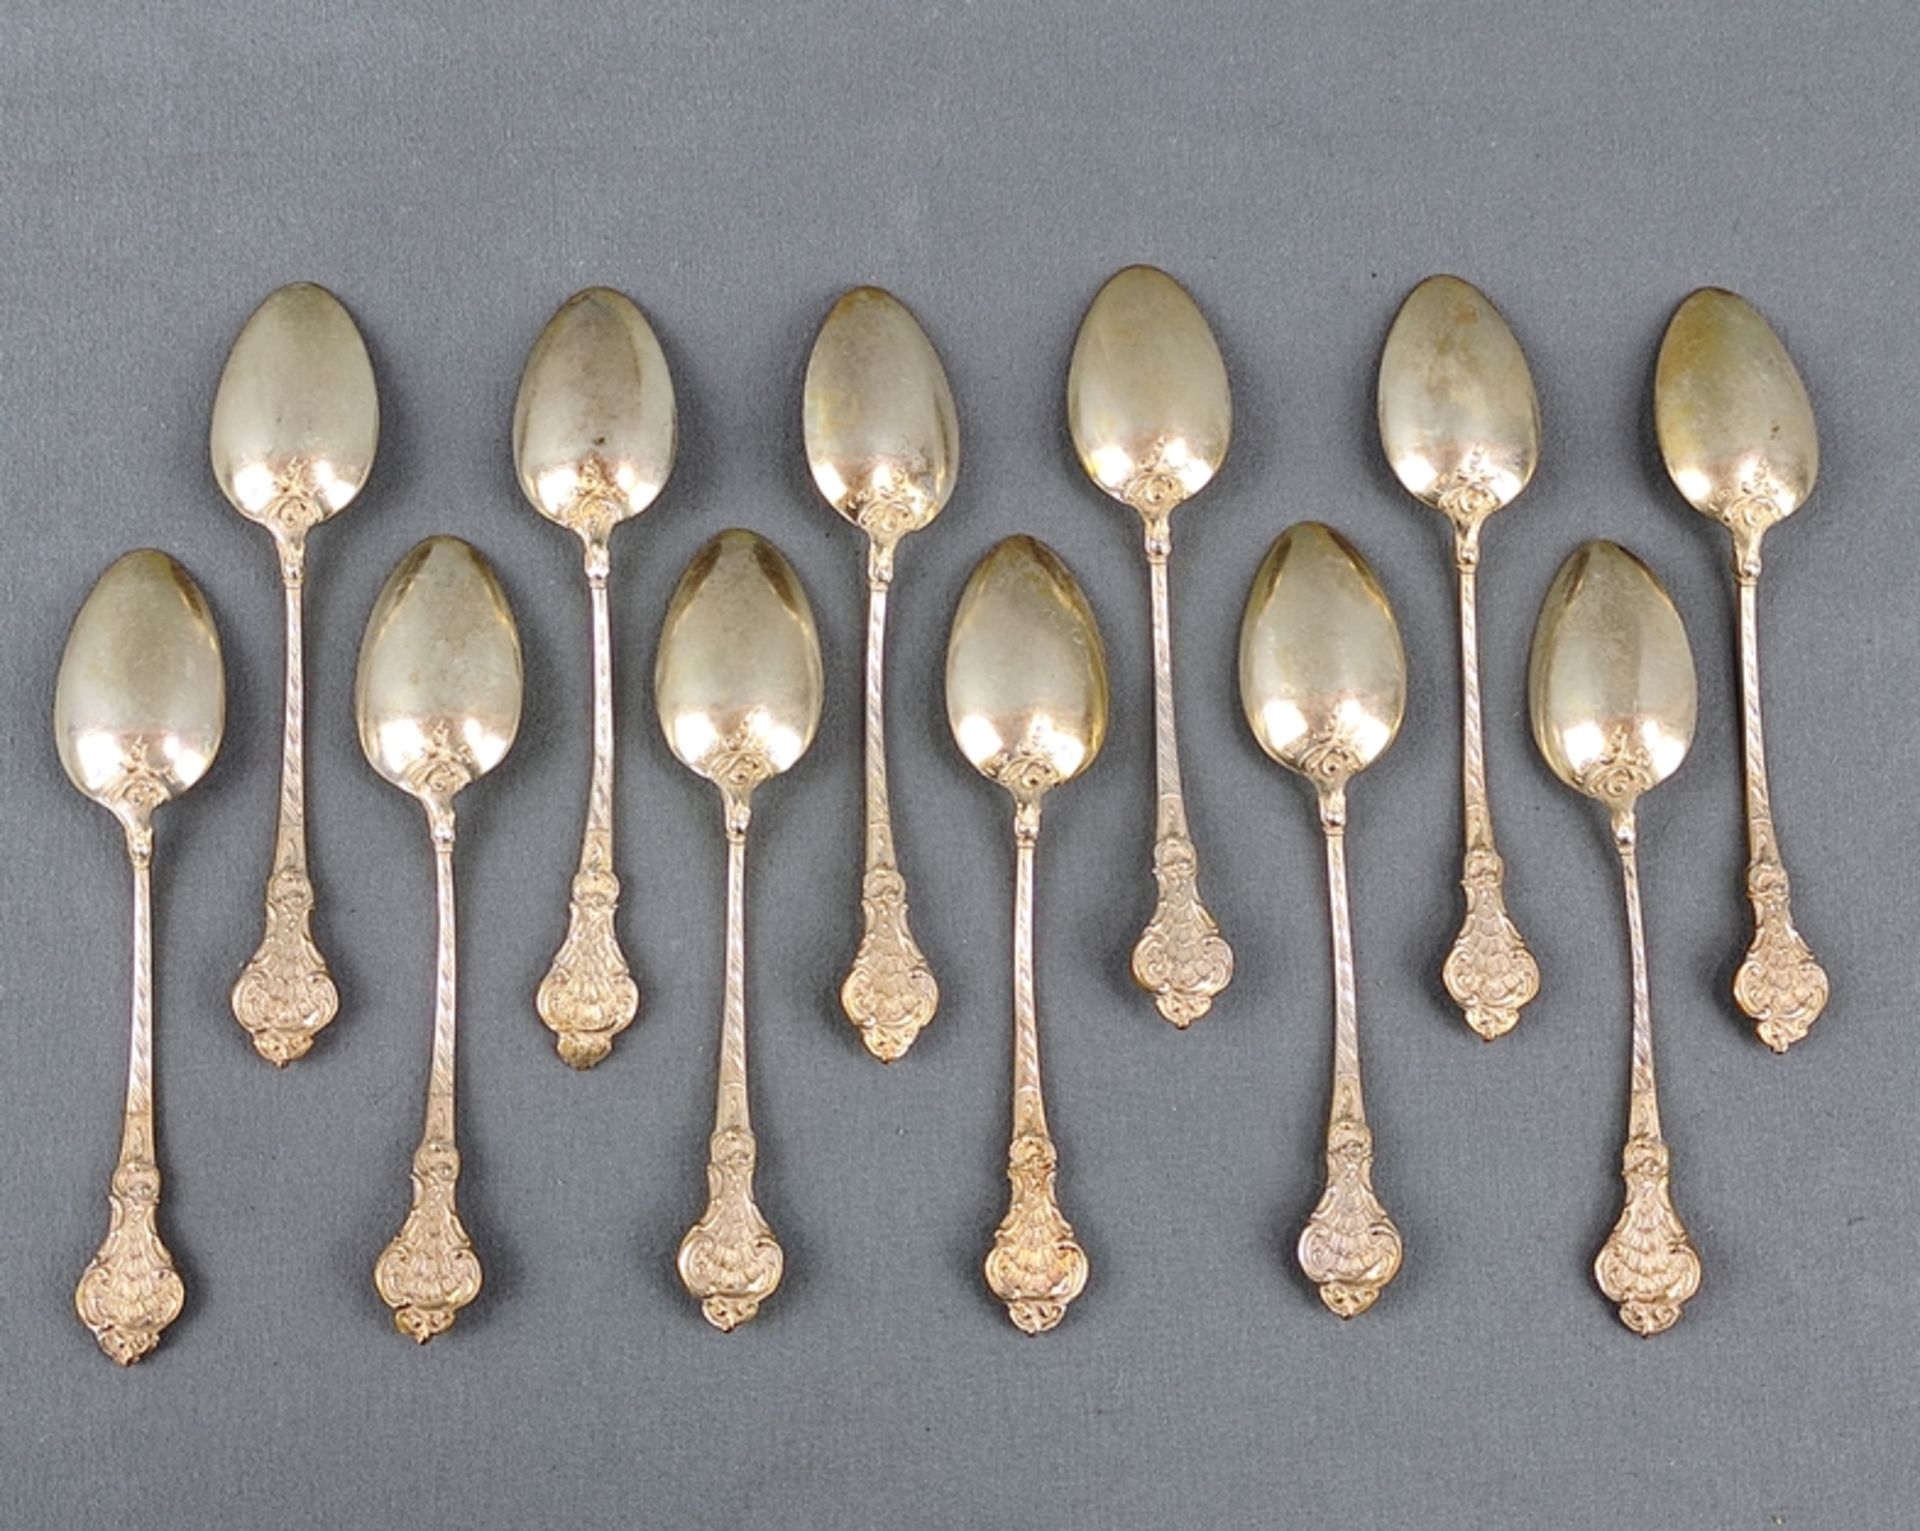 12 demitasse spoons, rocaille decoration in relief, Germany, silver 800, in case "Brinckmann & Lang - Image 3 of 3